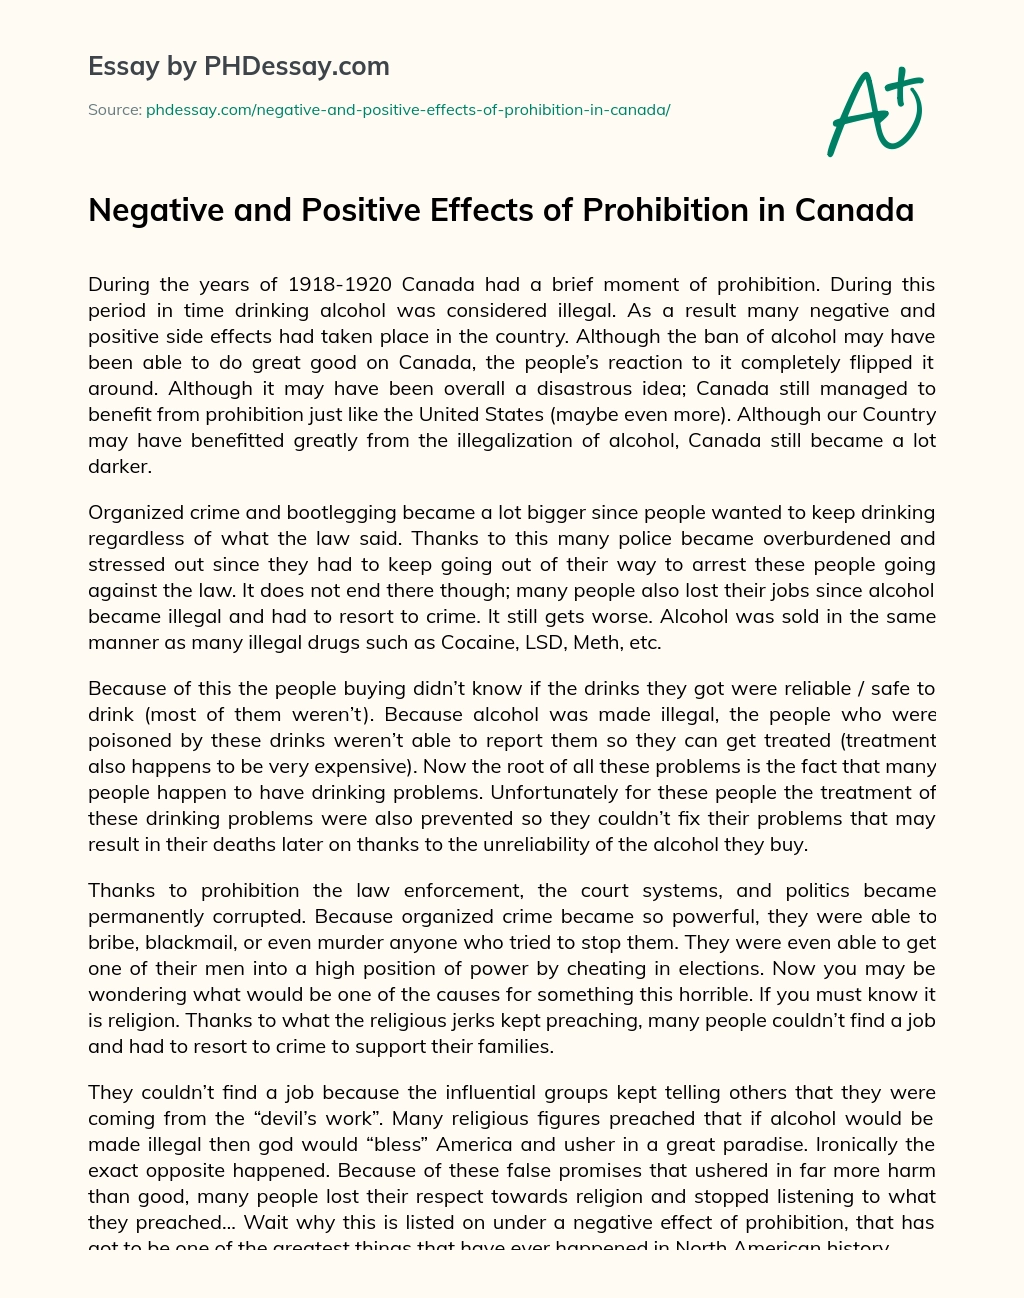 Negative and Positive Effects of Prohibition in Canada essay